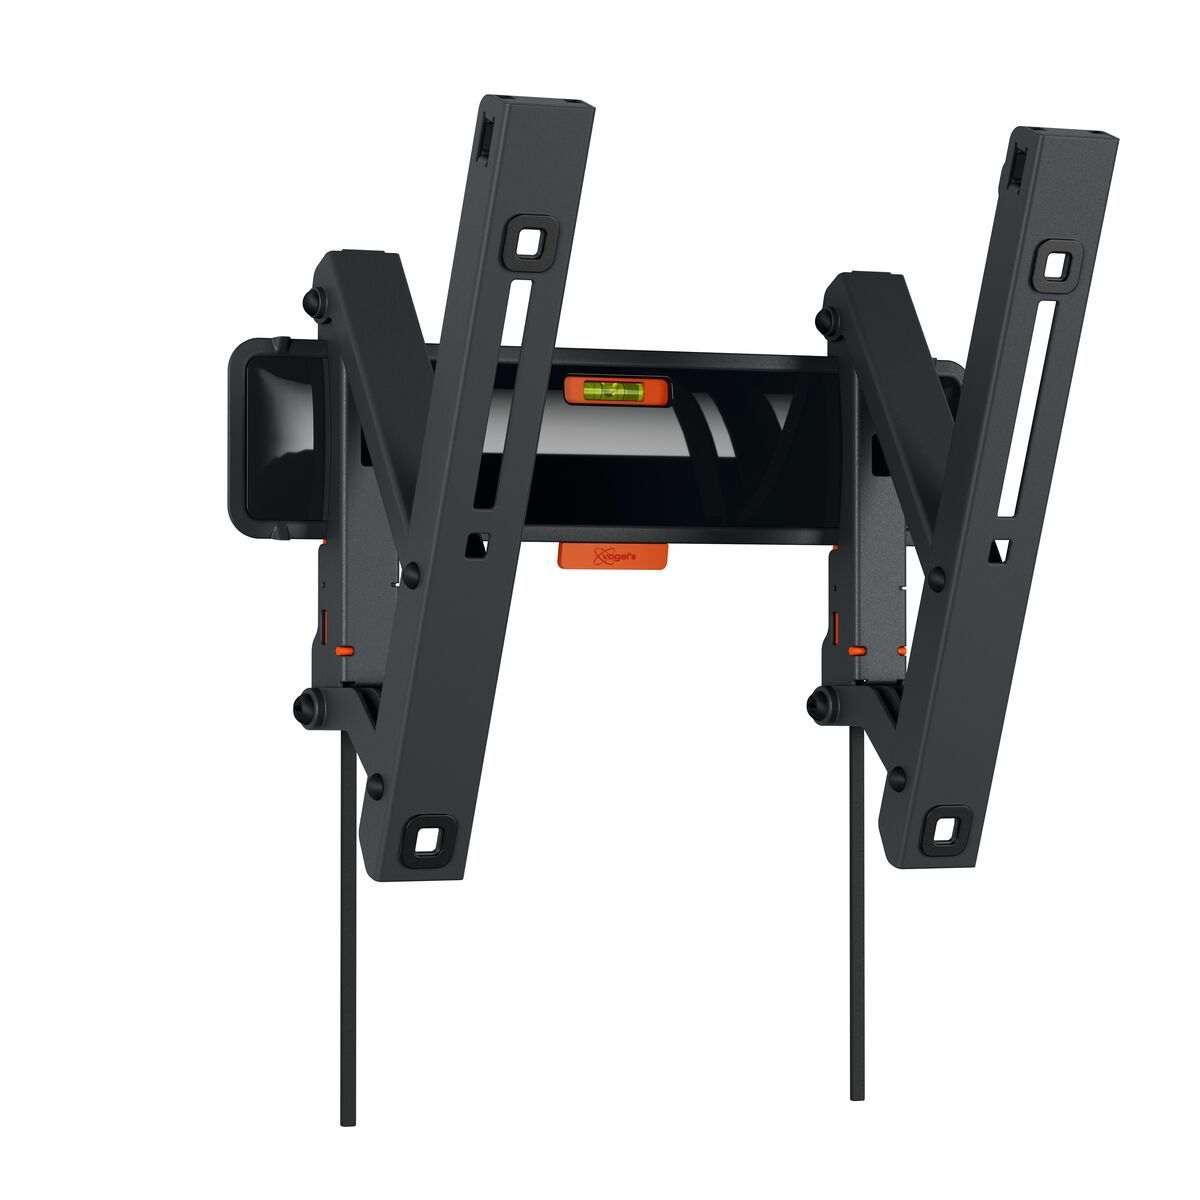 Vogel's TVM 3213 Tilting TV Wall Mount - Suitable for 19 up to 43 inch TVs - Tilt up to 20° - Product